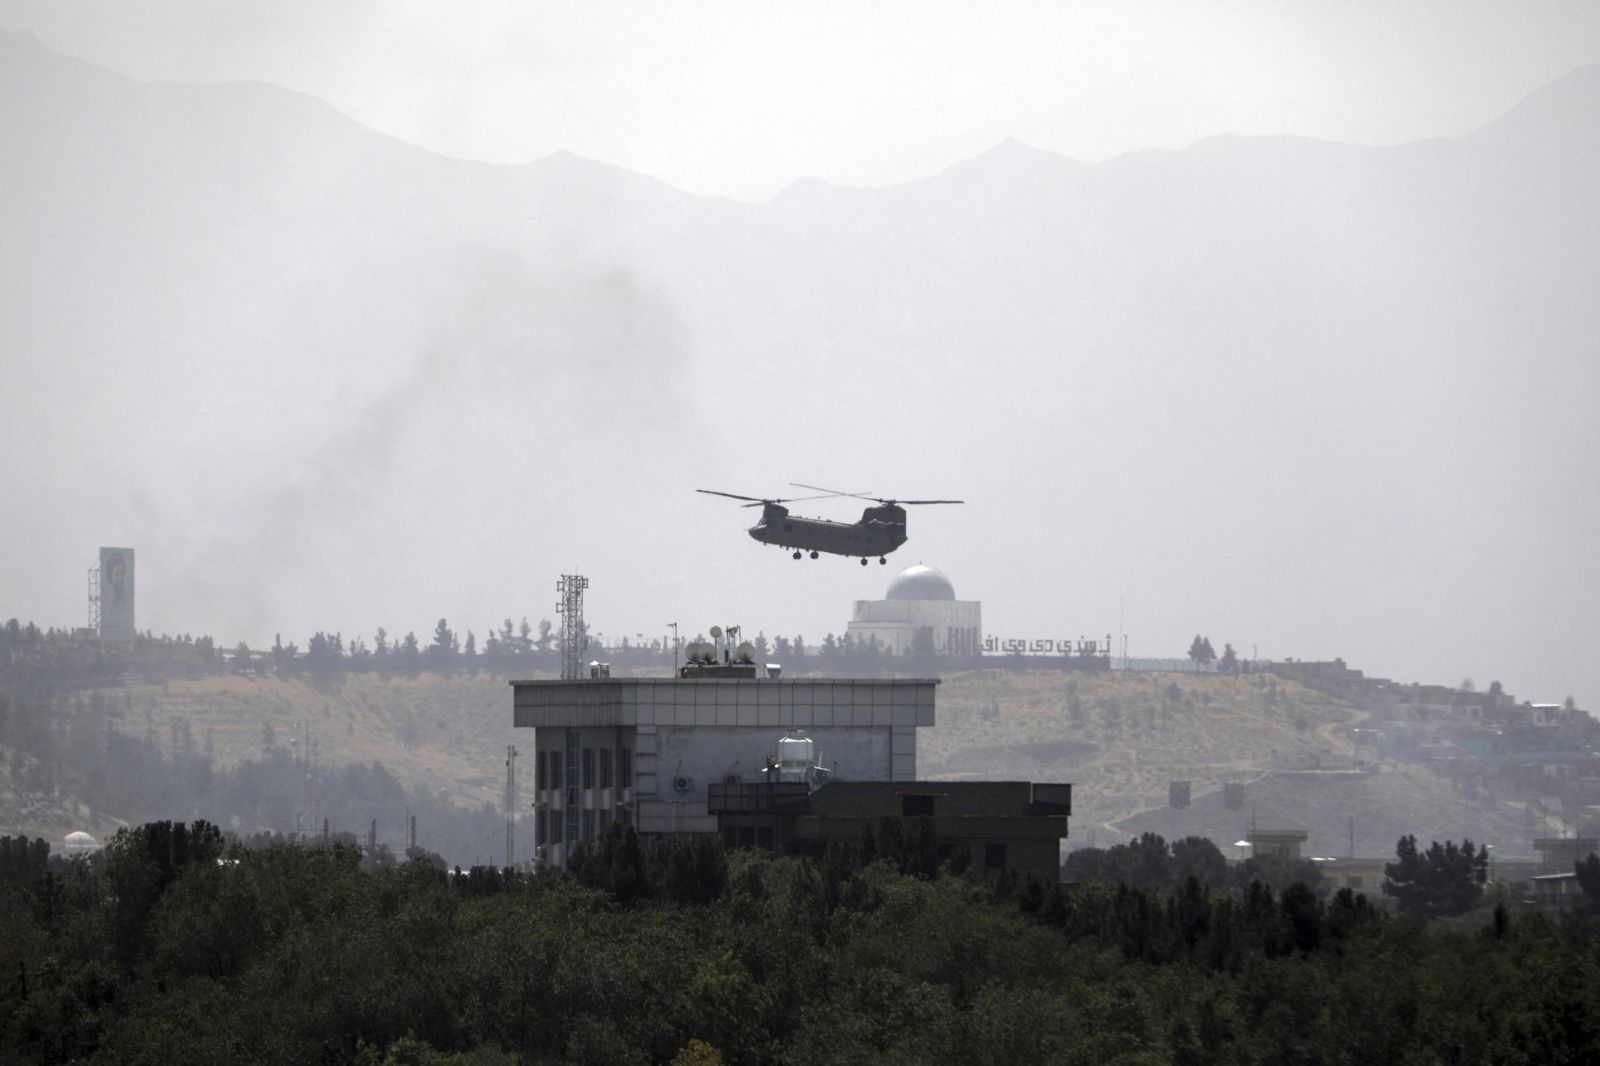 The-helicopter-landed-at-the-US-embassy-in-Kabul-during-scaled.jpeg.jpg